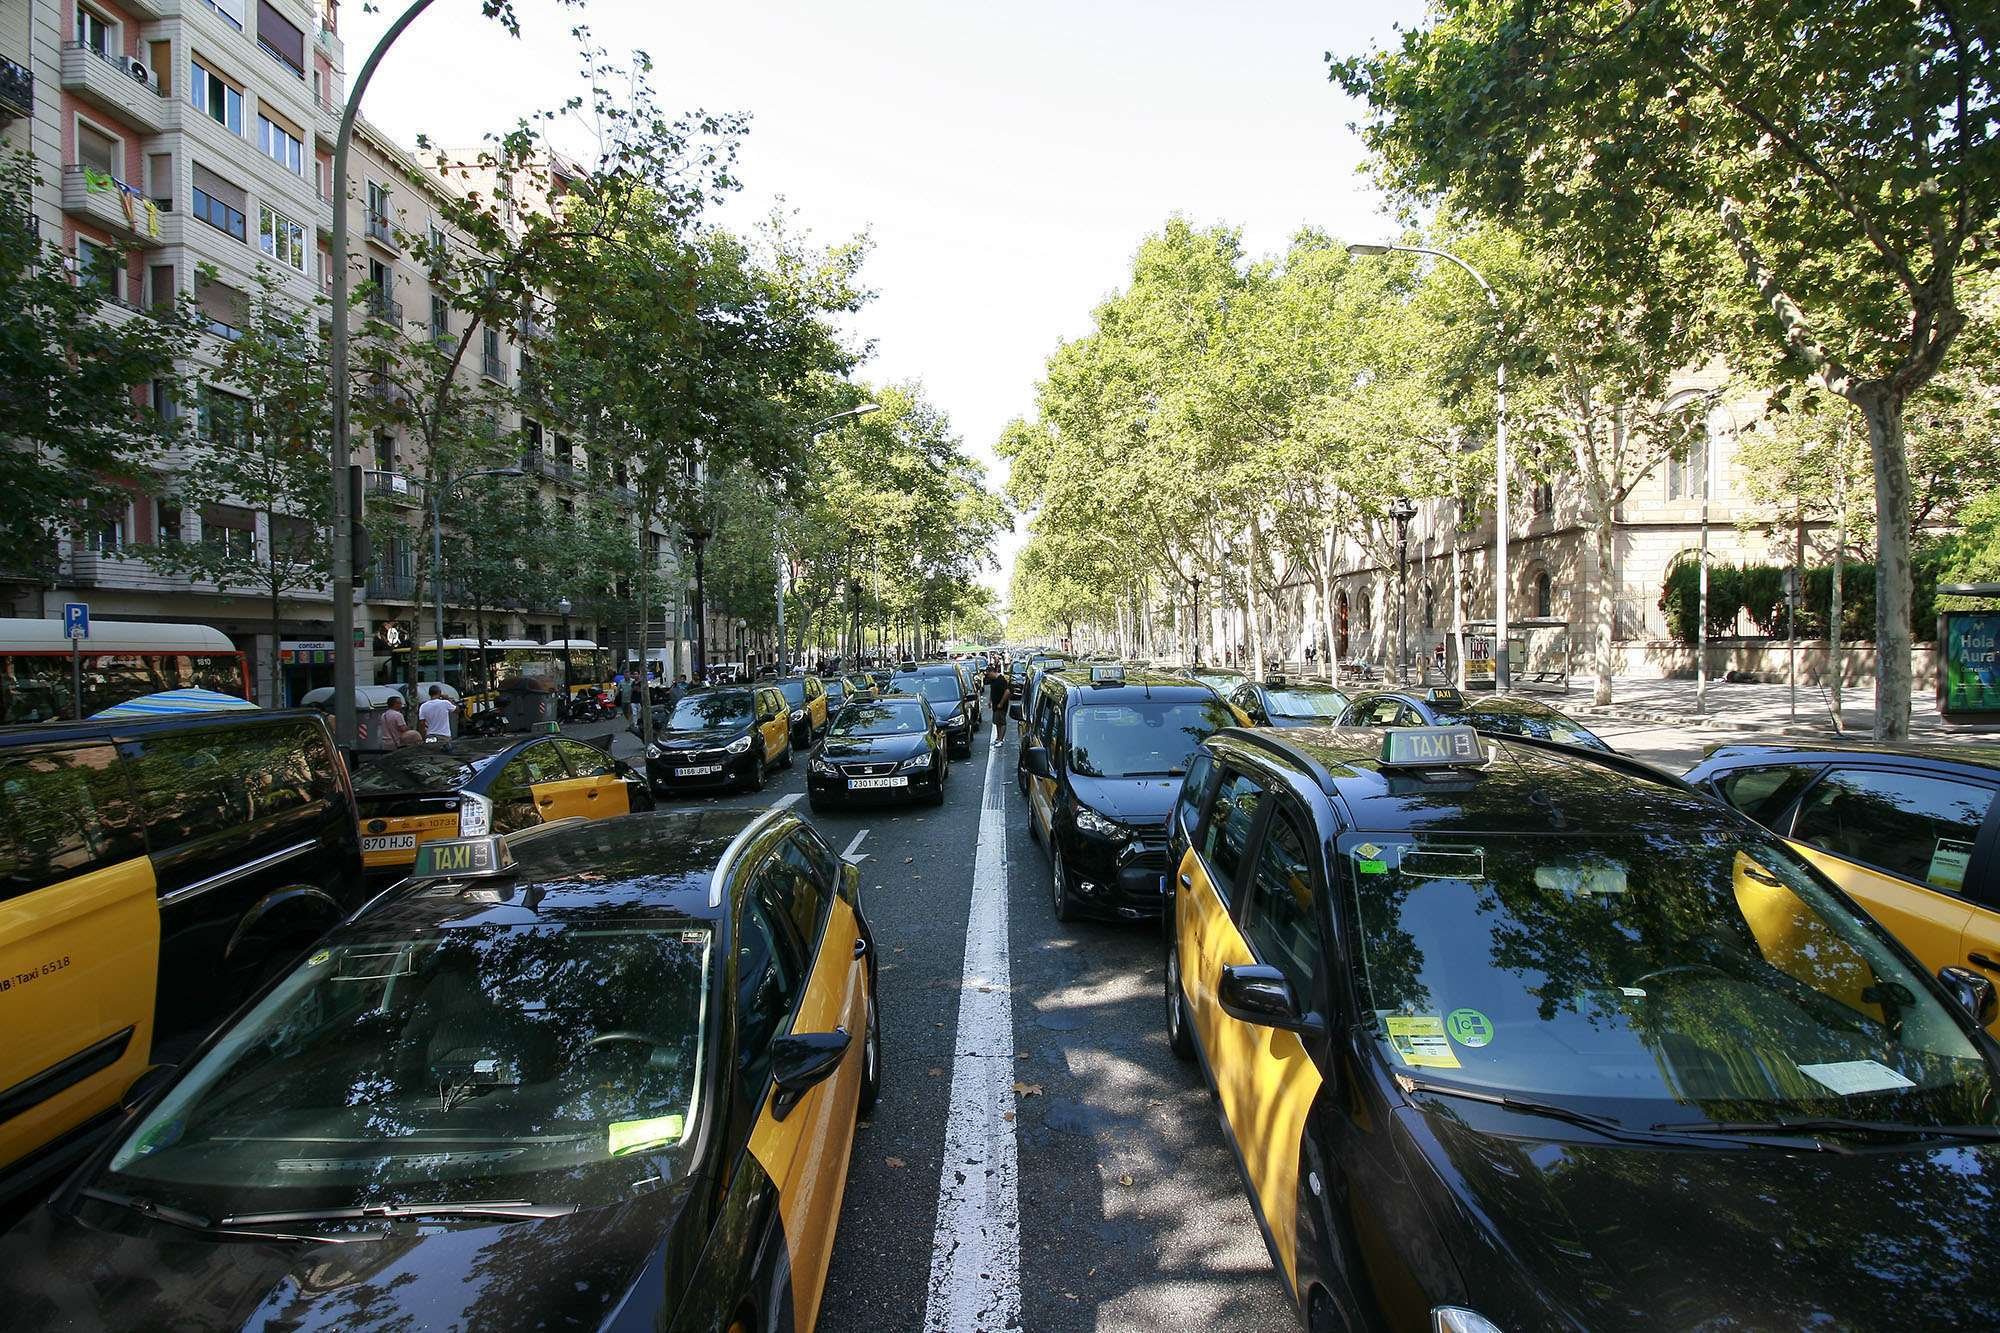 Miroslavo's Photography: Taxis go on on strike in Barcelona